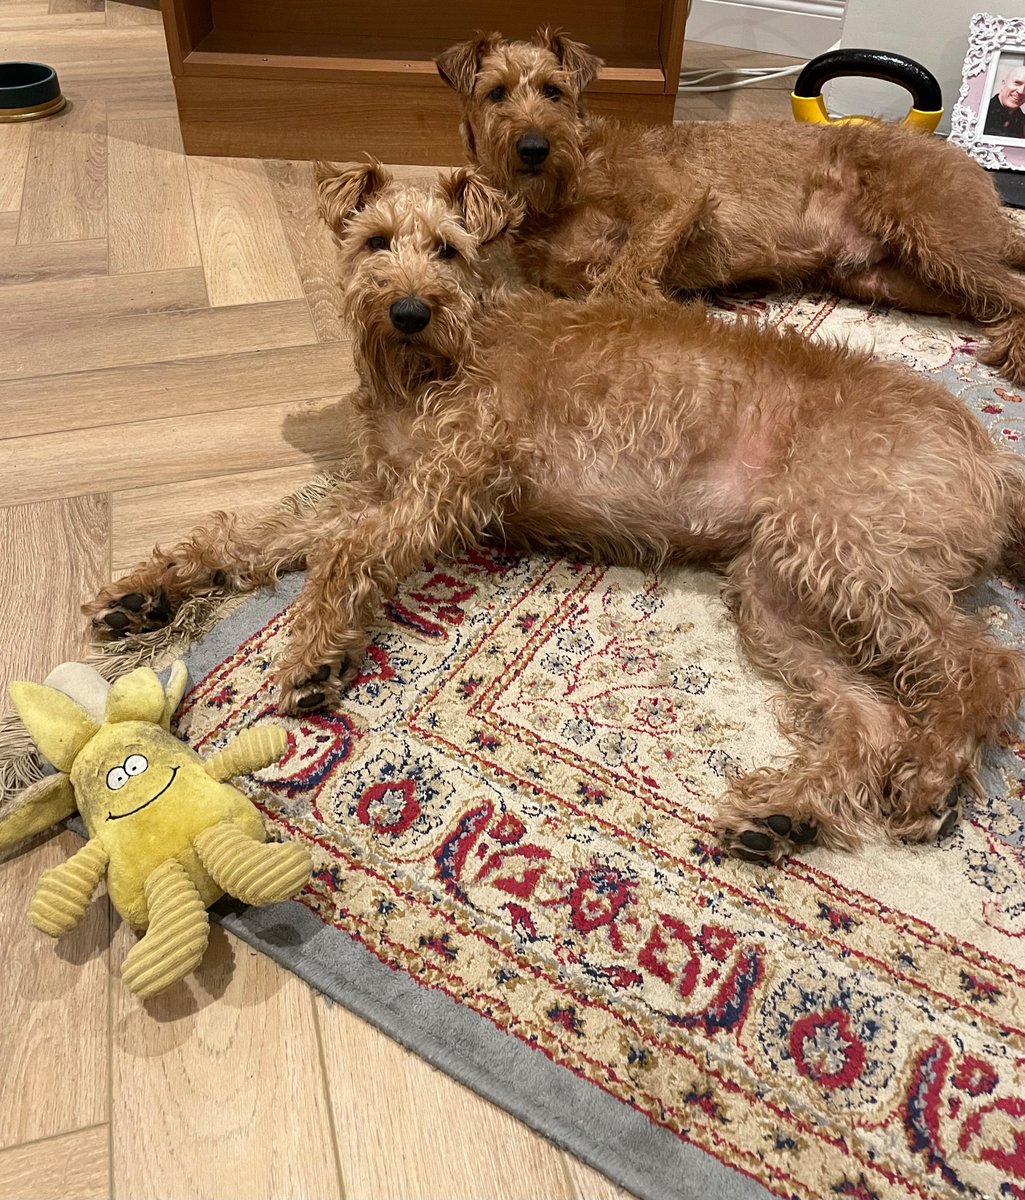 Tonight we are mostly resting up and taking it easy!! 😴😴 settling into 2024, and thinking of all the mischief we can do!!😂🤣😂 Happy new year to all our Pals!!❤️❤️❤️